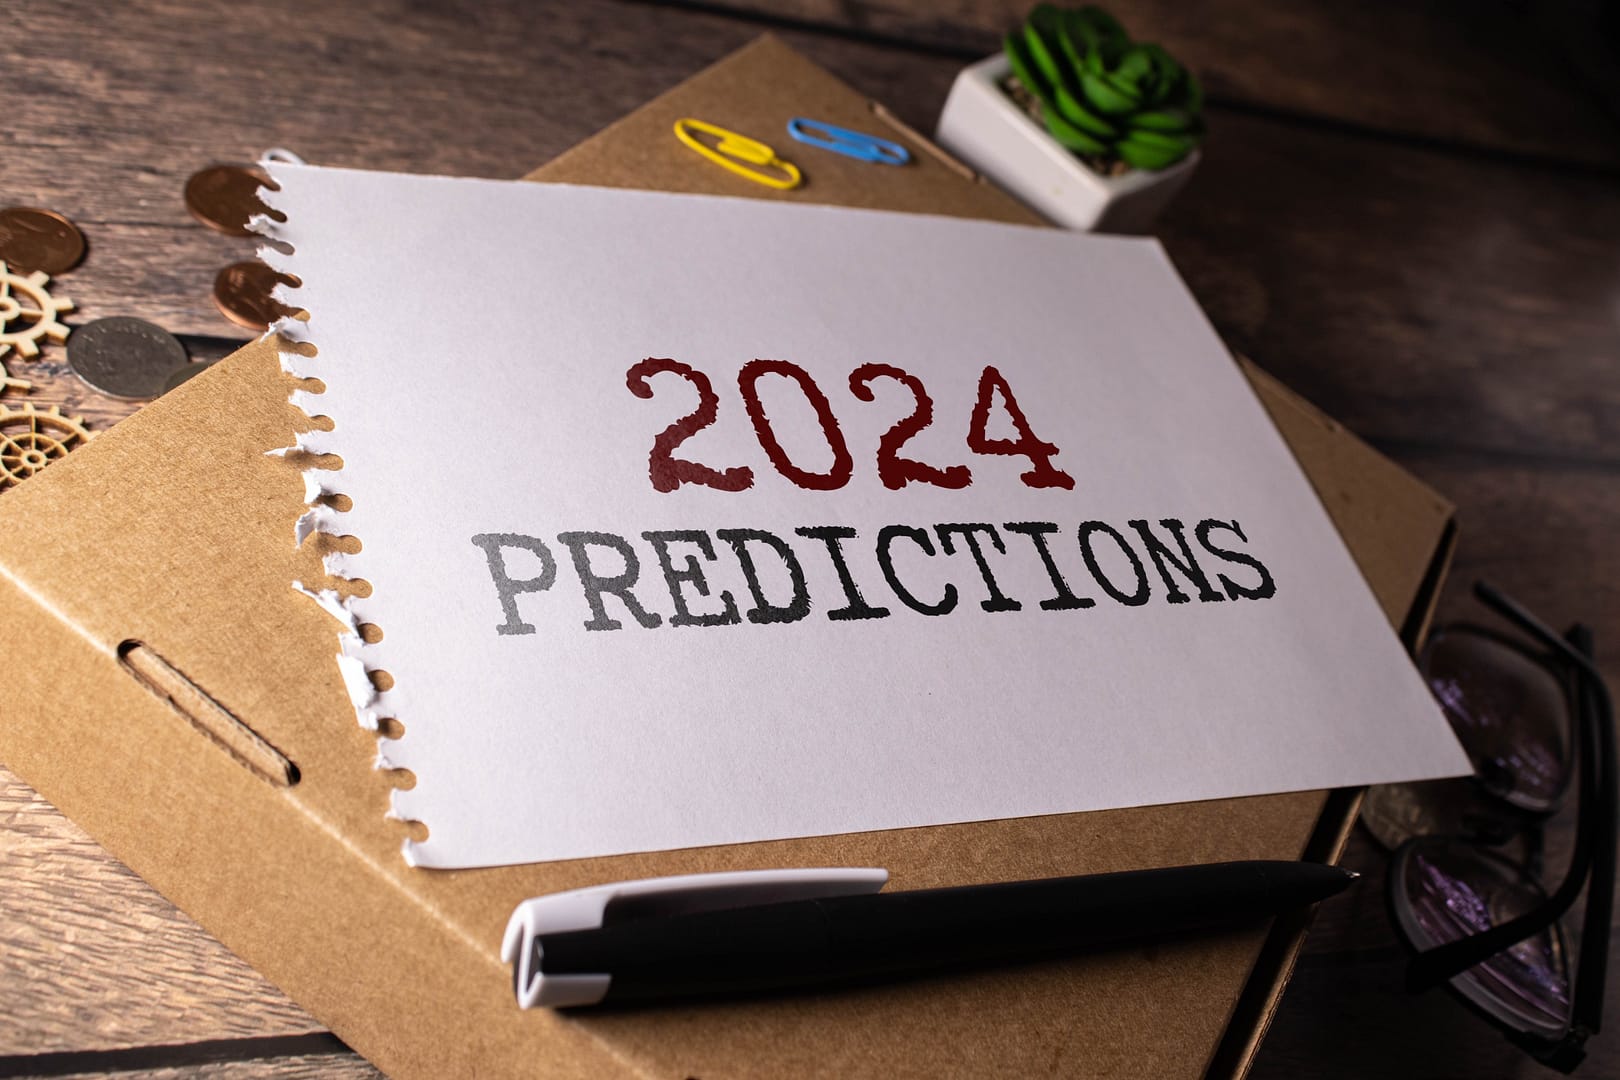 2024 predictions written on paper